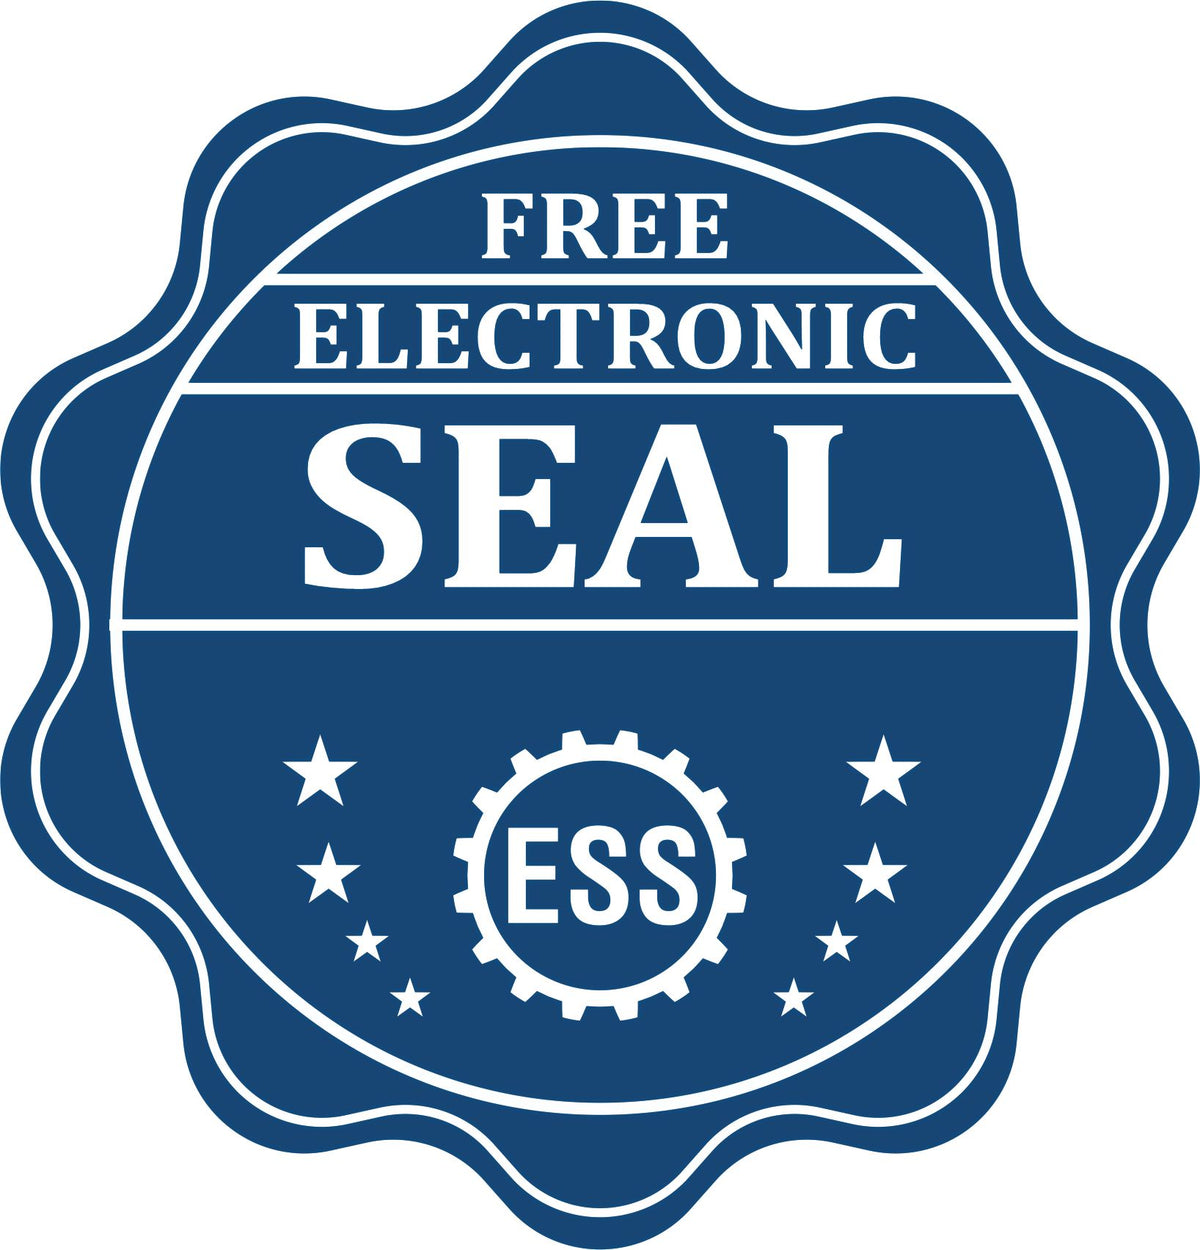 A badge showing a free electronic seal for the Virginia Desk Architect Embossing Seal with stars and the ESS gear on the emblem.